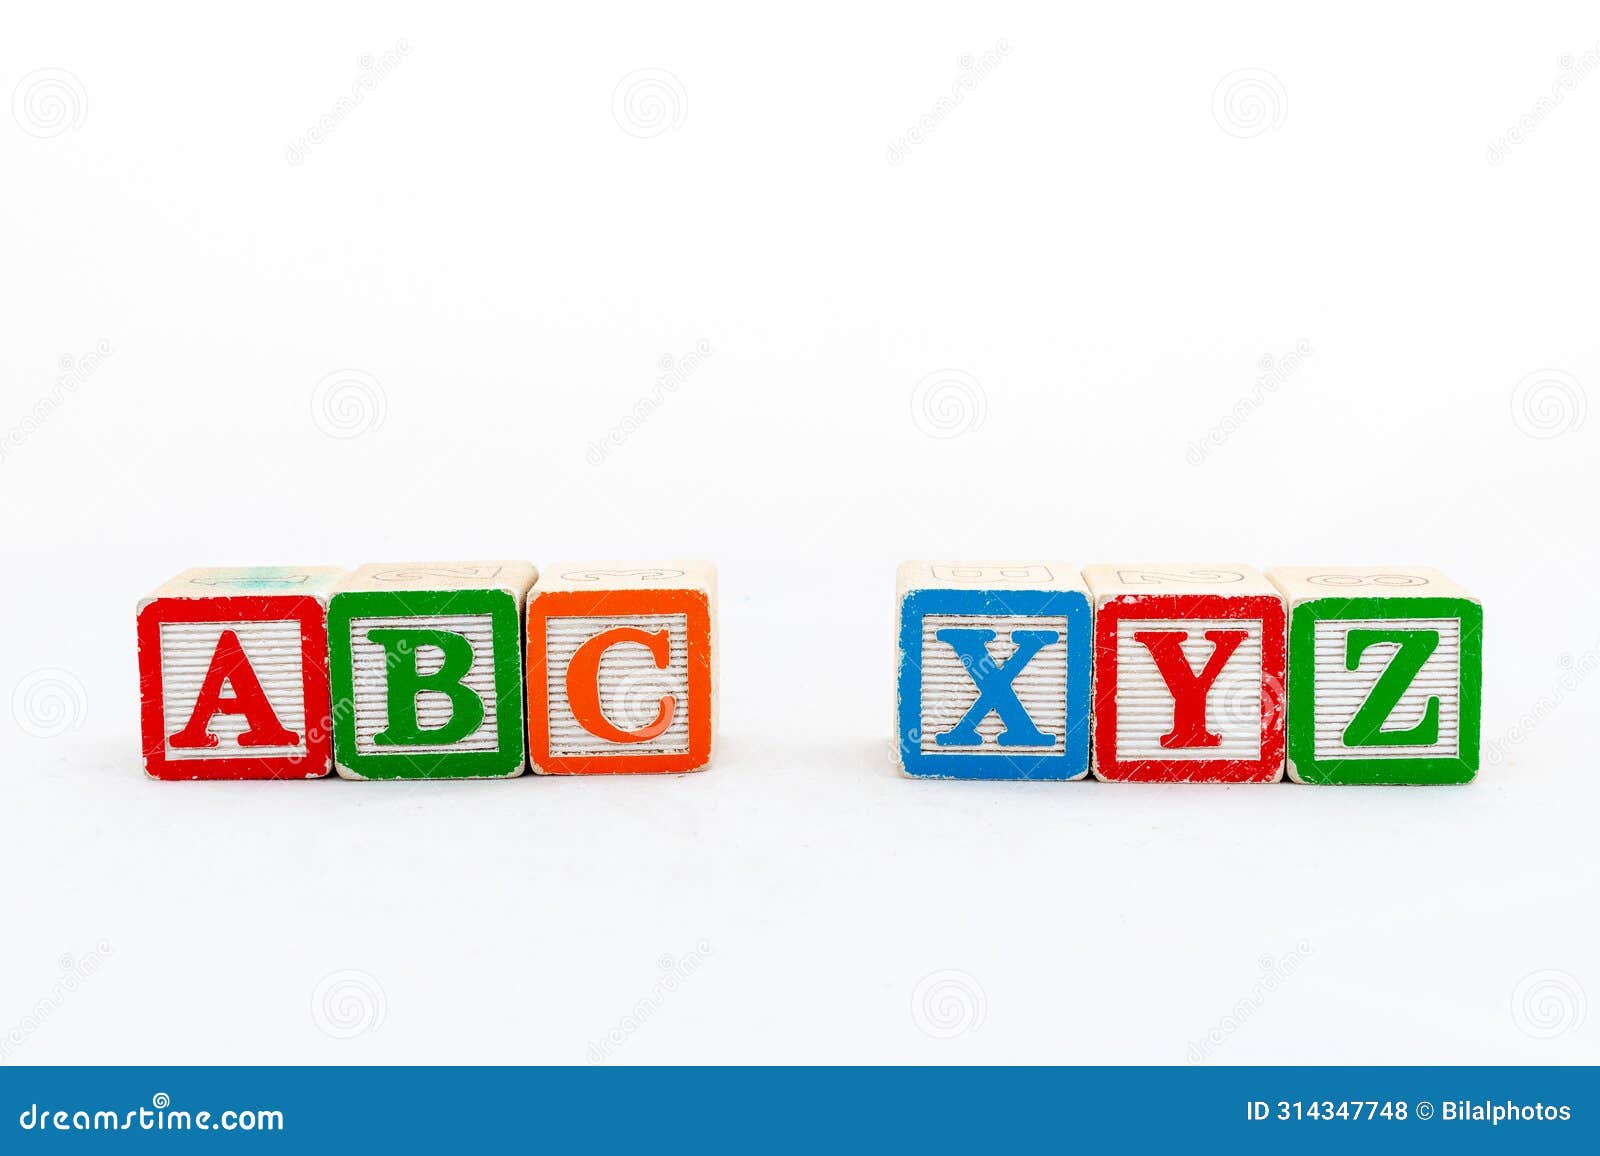 abc and xyz alphabets wooden blocks. selective focused with copy space